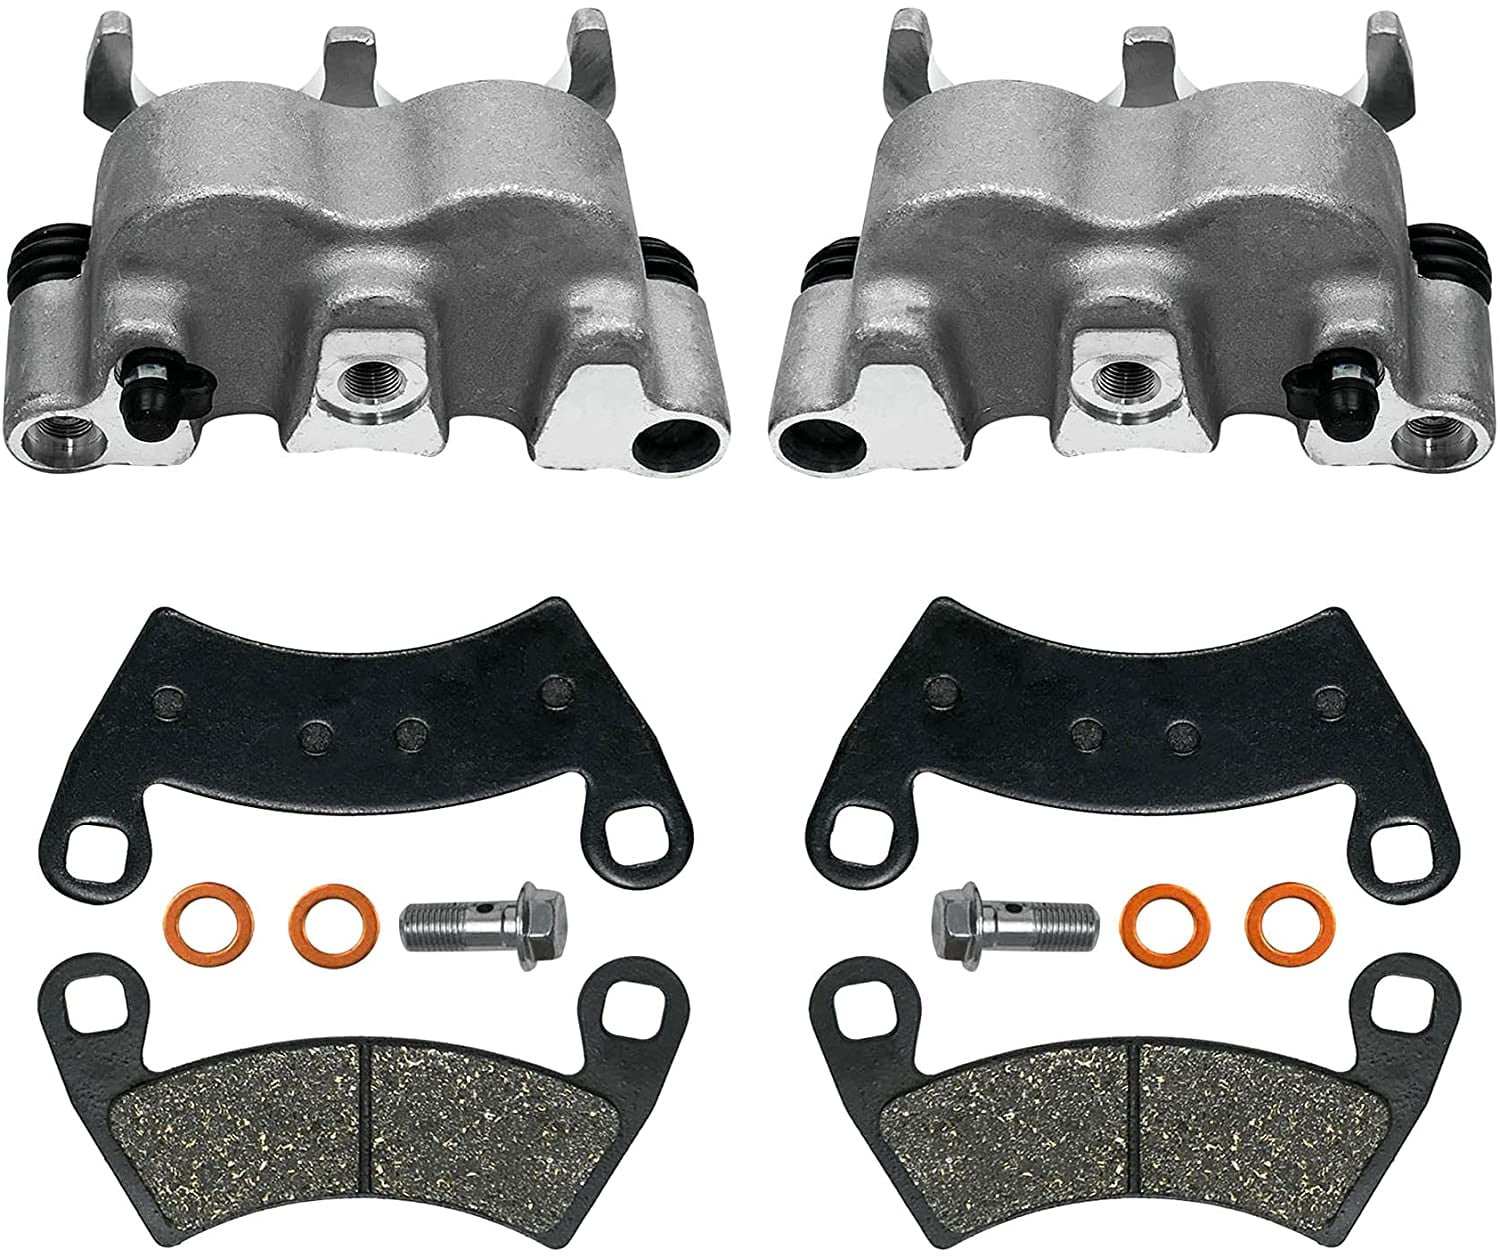 Replace 1911283 1911284 Front Brake Caliper Set with Pads Left and Right Fit for Polaris Ranger 4X4 500 EFI 570 700 800 HST RZR RS1 1000 XP/XP 4/S4 GEM GENERAL 